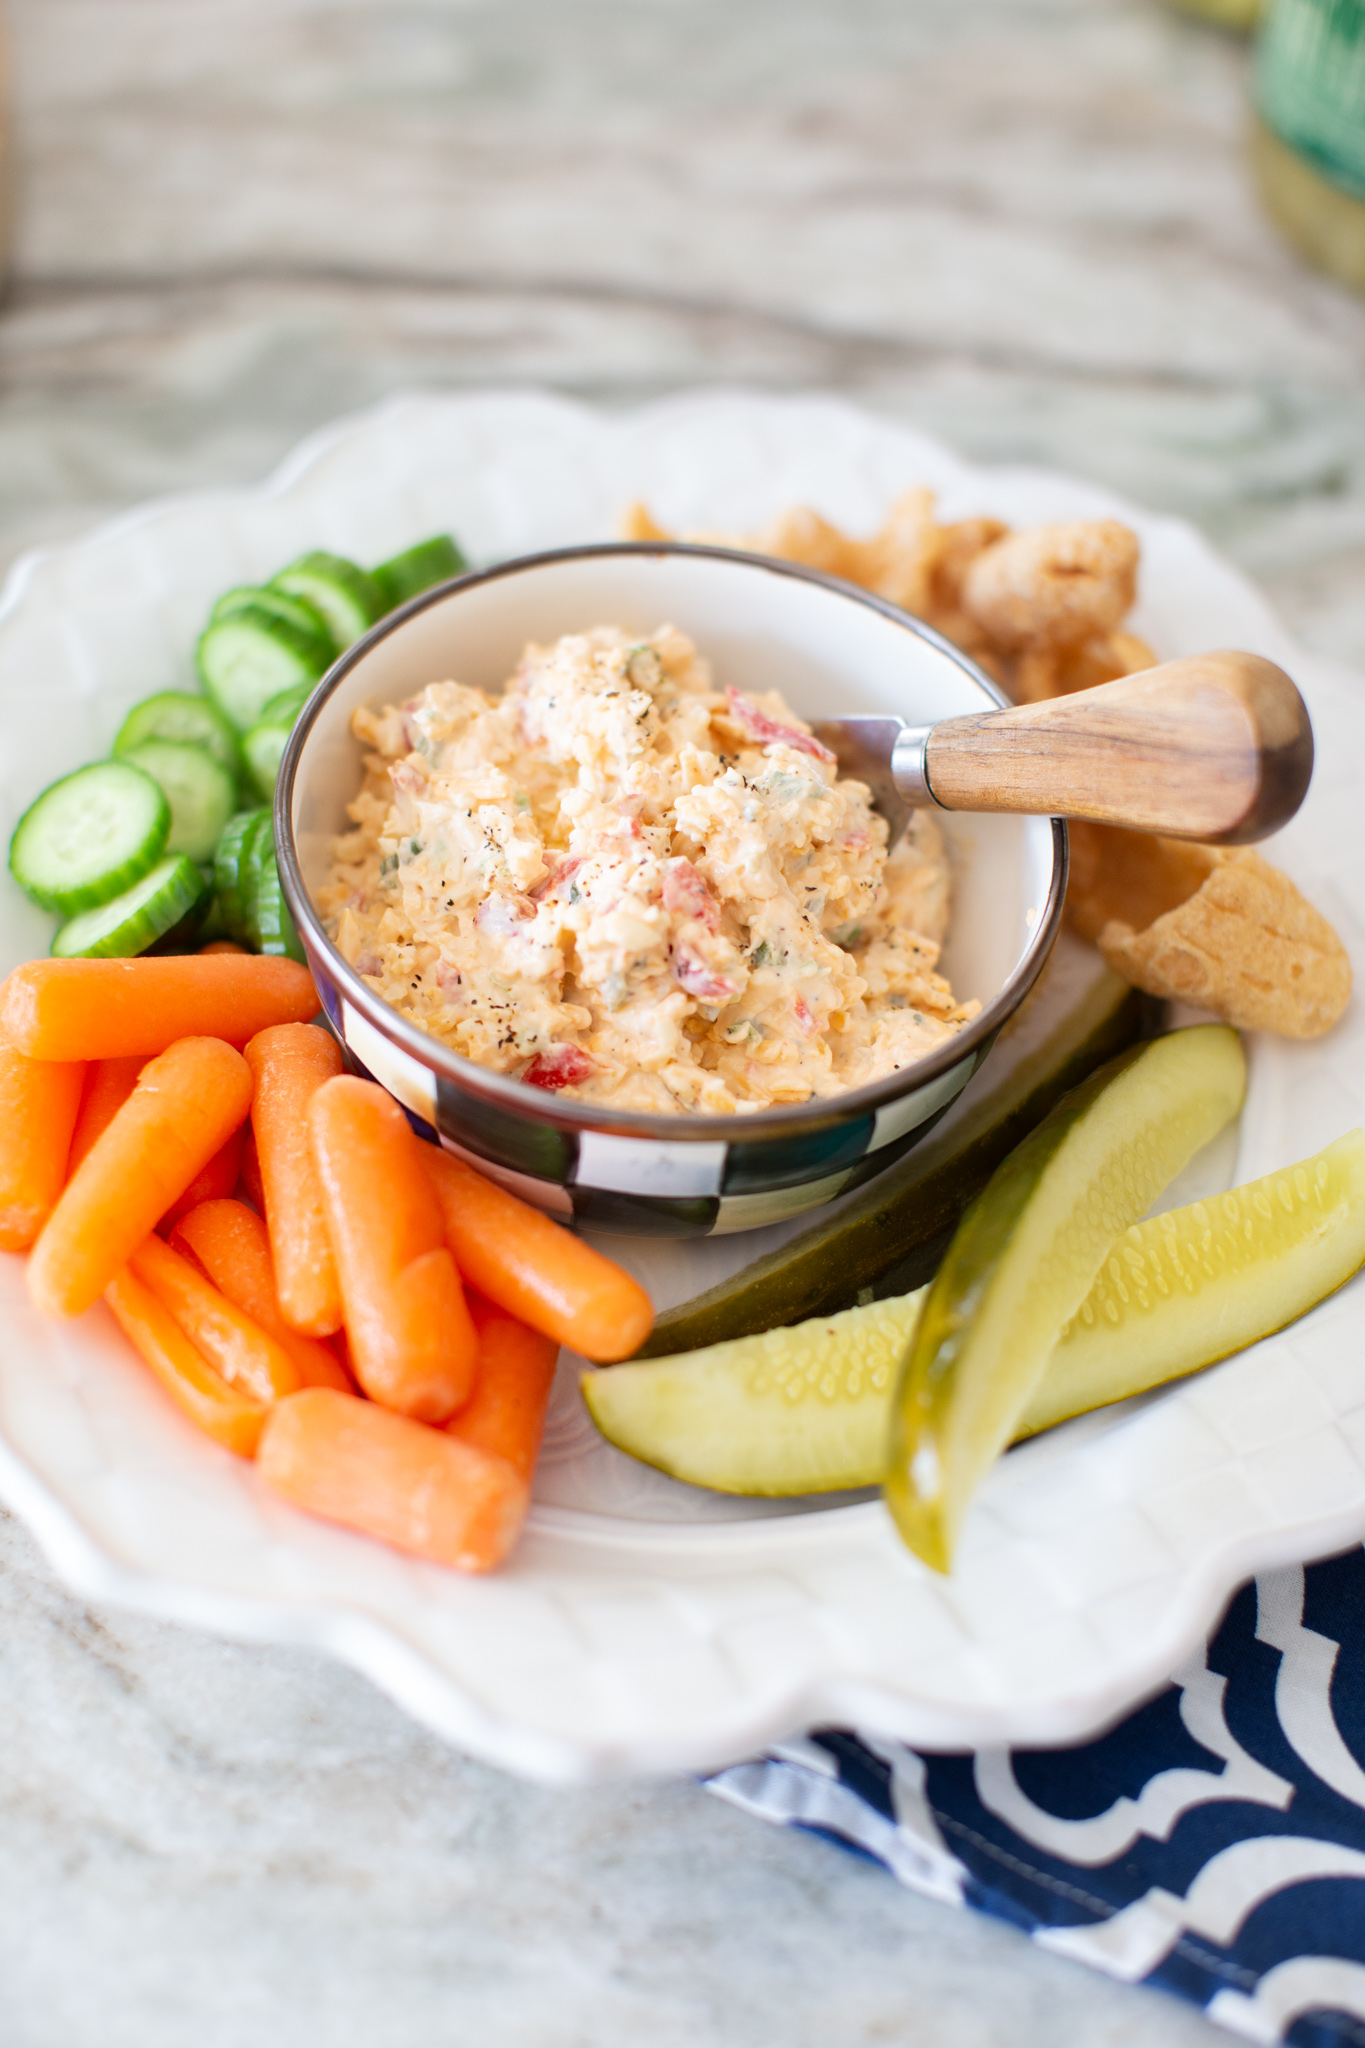 Jalapeno Pimento Cheese by popular Ohio food blog, Coffee Beans and Bobby Pins: image of a white plate with a bowl of jalapeno pimento cheese, baby carrots, English cucumber slices, pickle spears, and chips. 